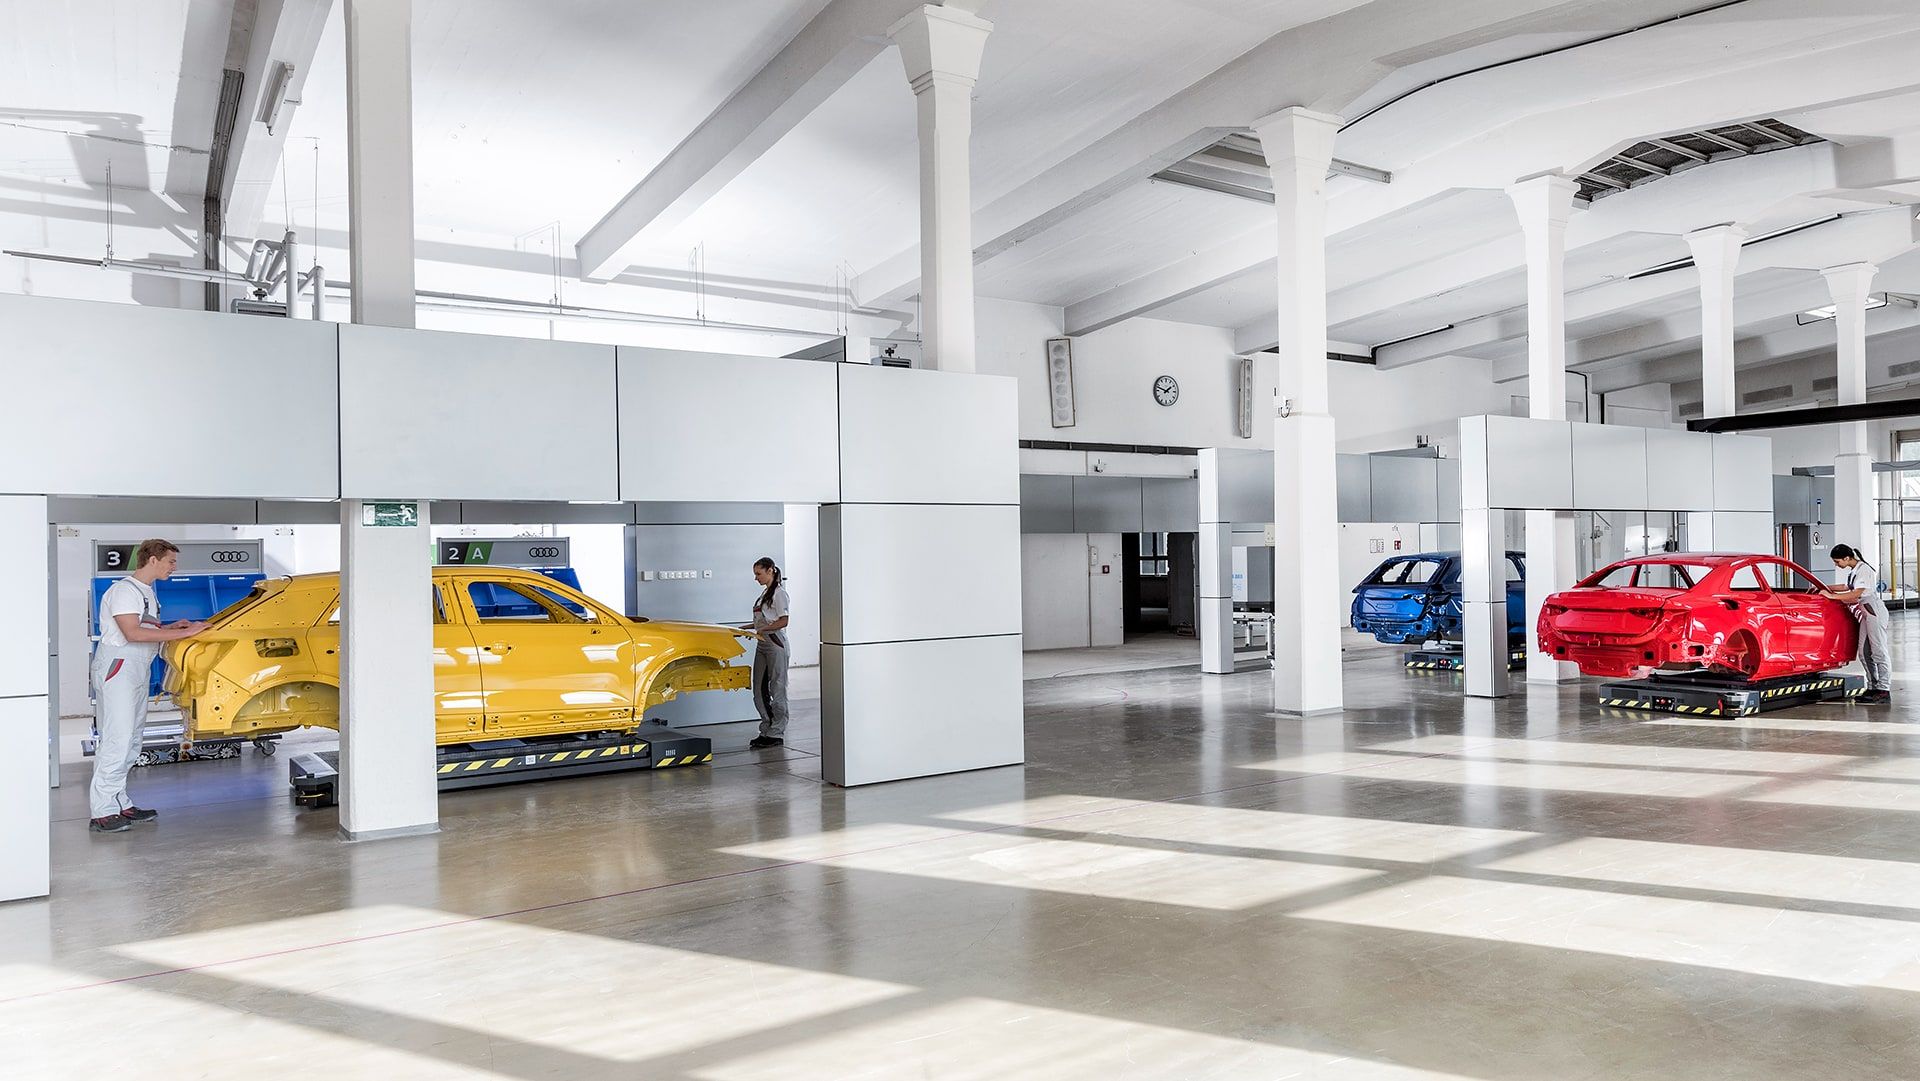 The image shows a state-of-the-art production hall with the bodywork of Audi cars on driverless transport systems.